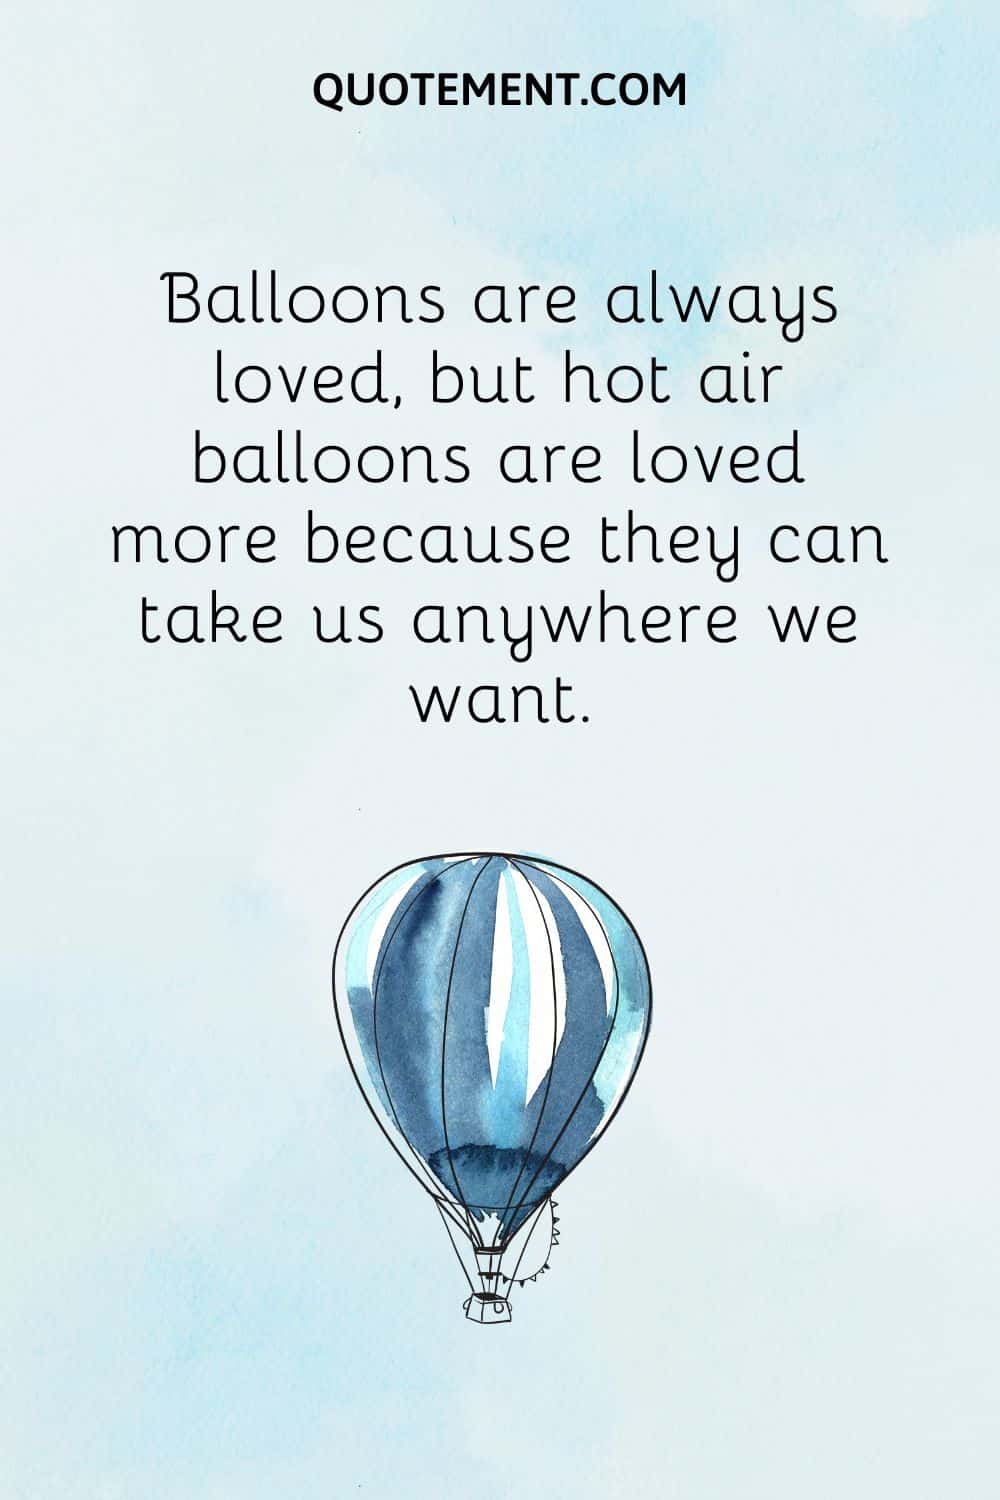  Balloons are always loved, but hot air balloons are loved more because they can take us anywhere we want